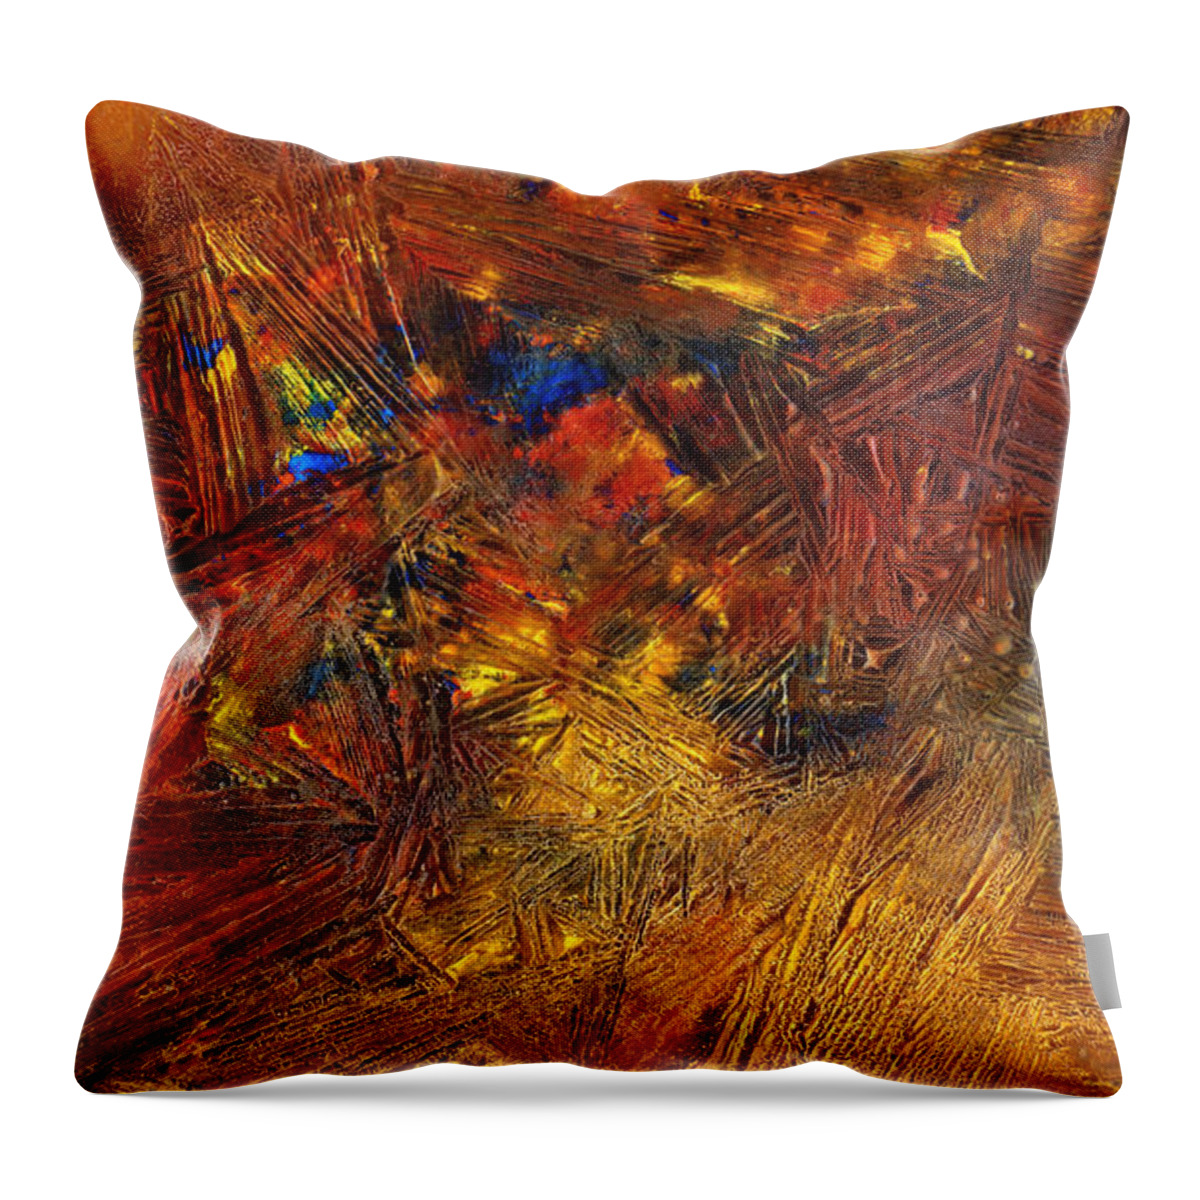 Frozen Throw Pillow featuring the mixed media Icy abstract 11 by Sami Tiainen